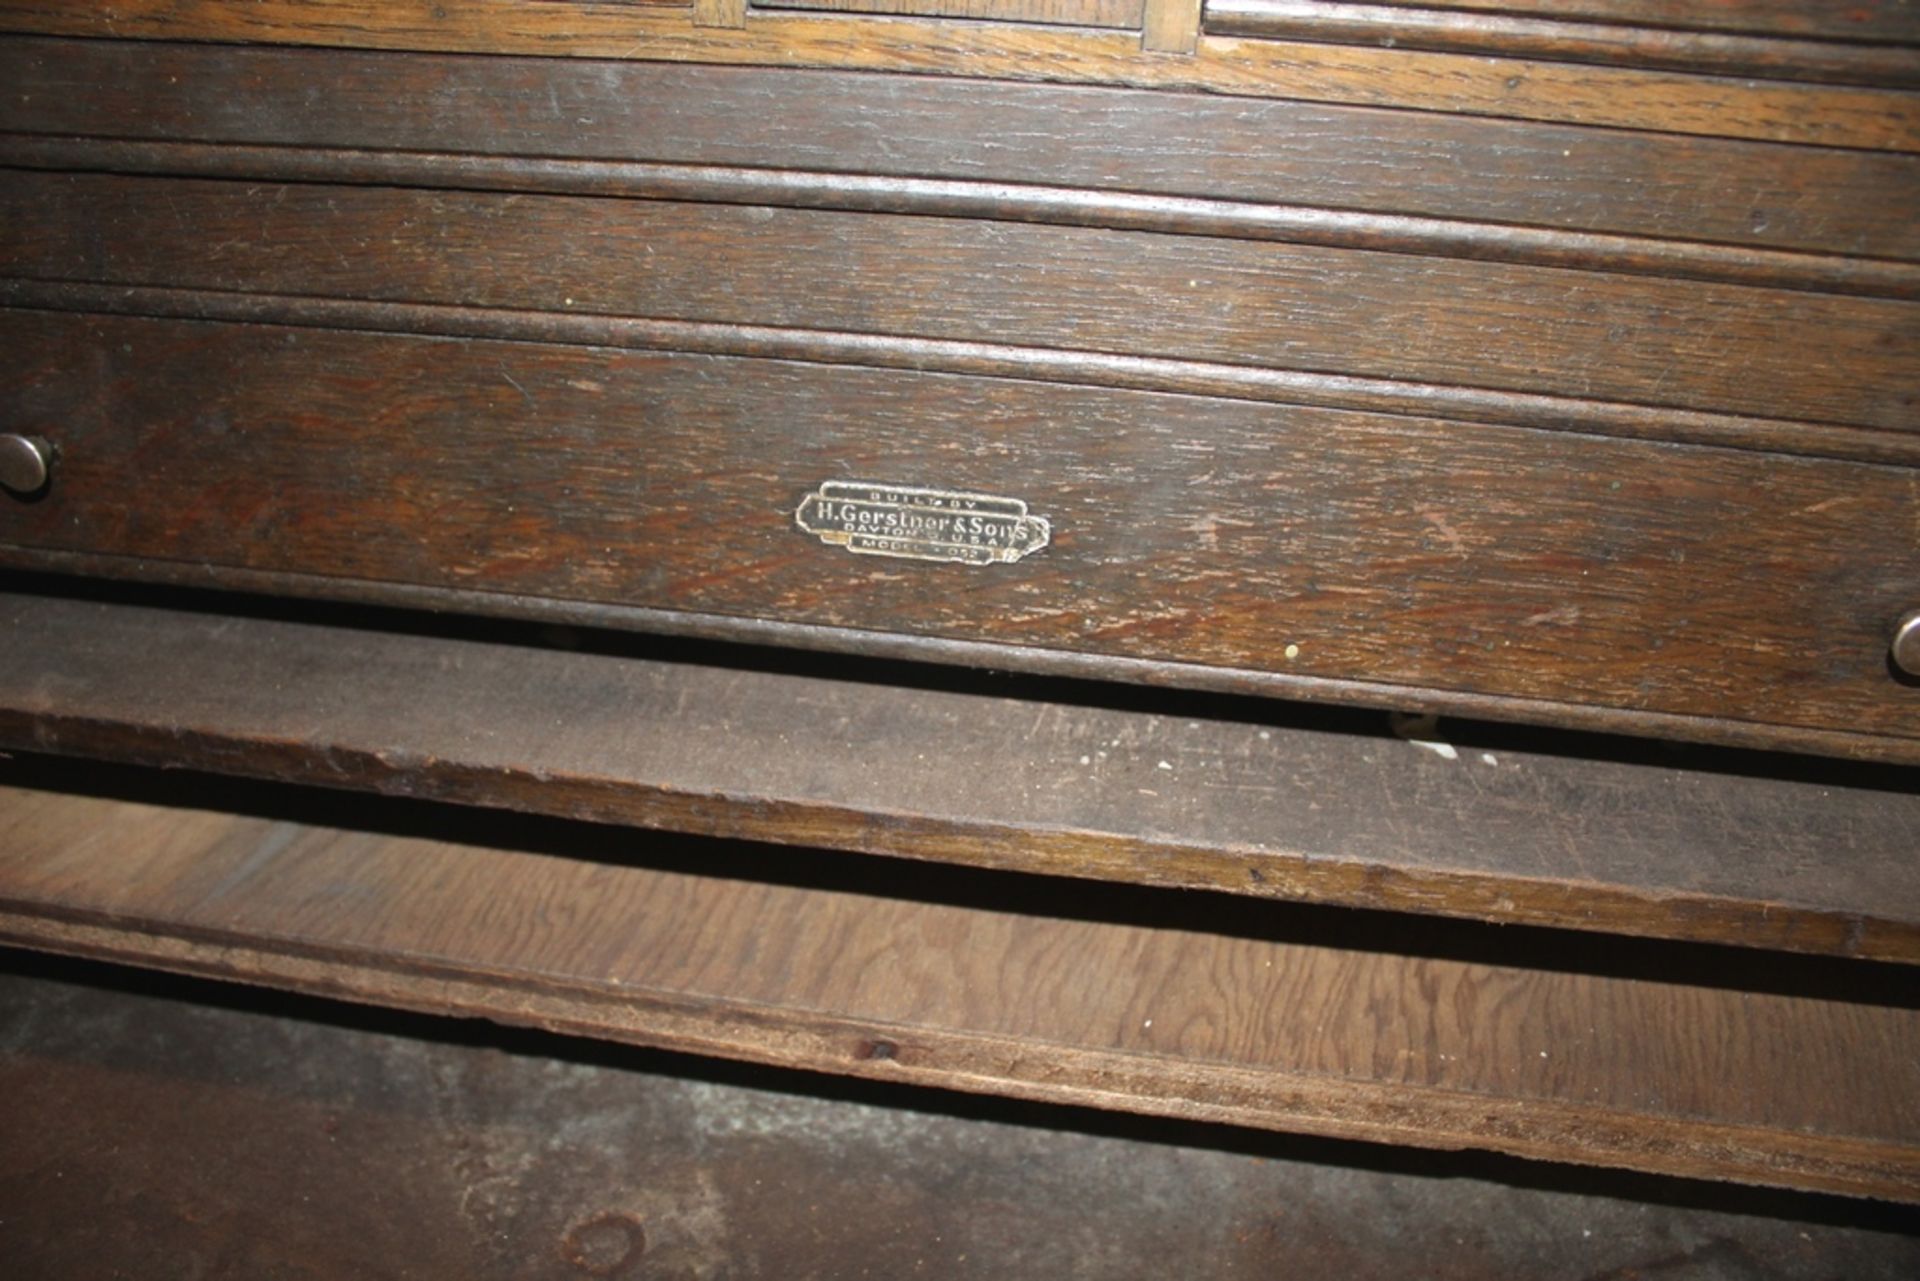 H. GERSTNER & SON MACHINIST TOOL CHEST - Image 2 of 2